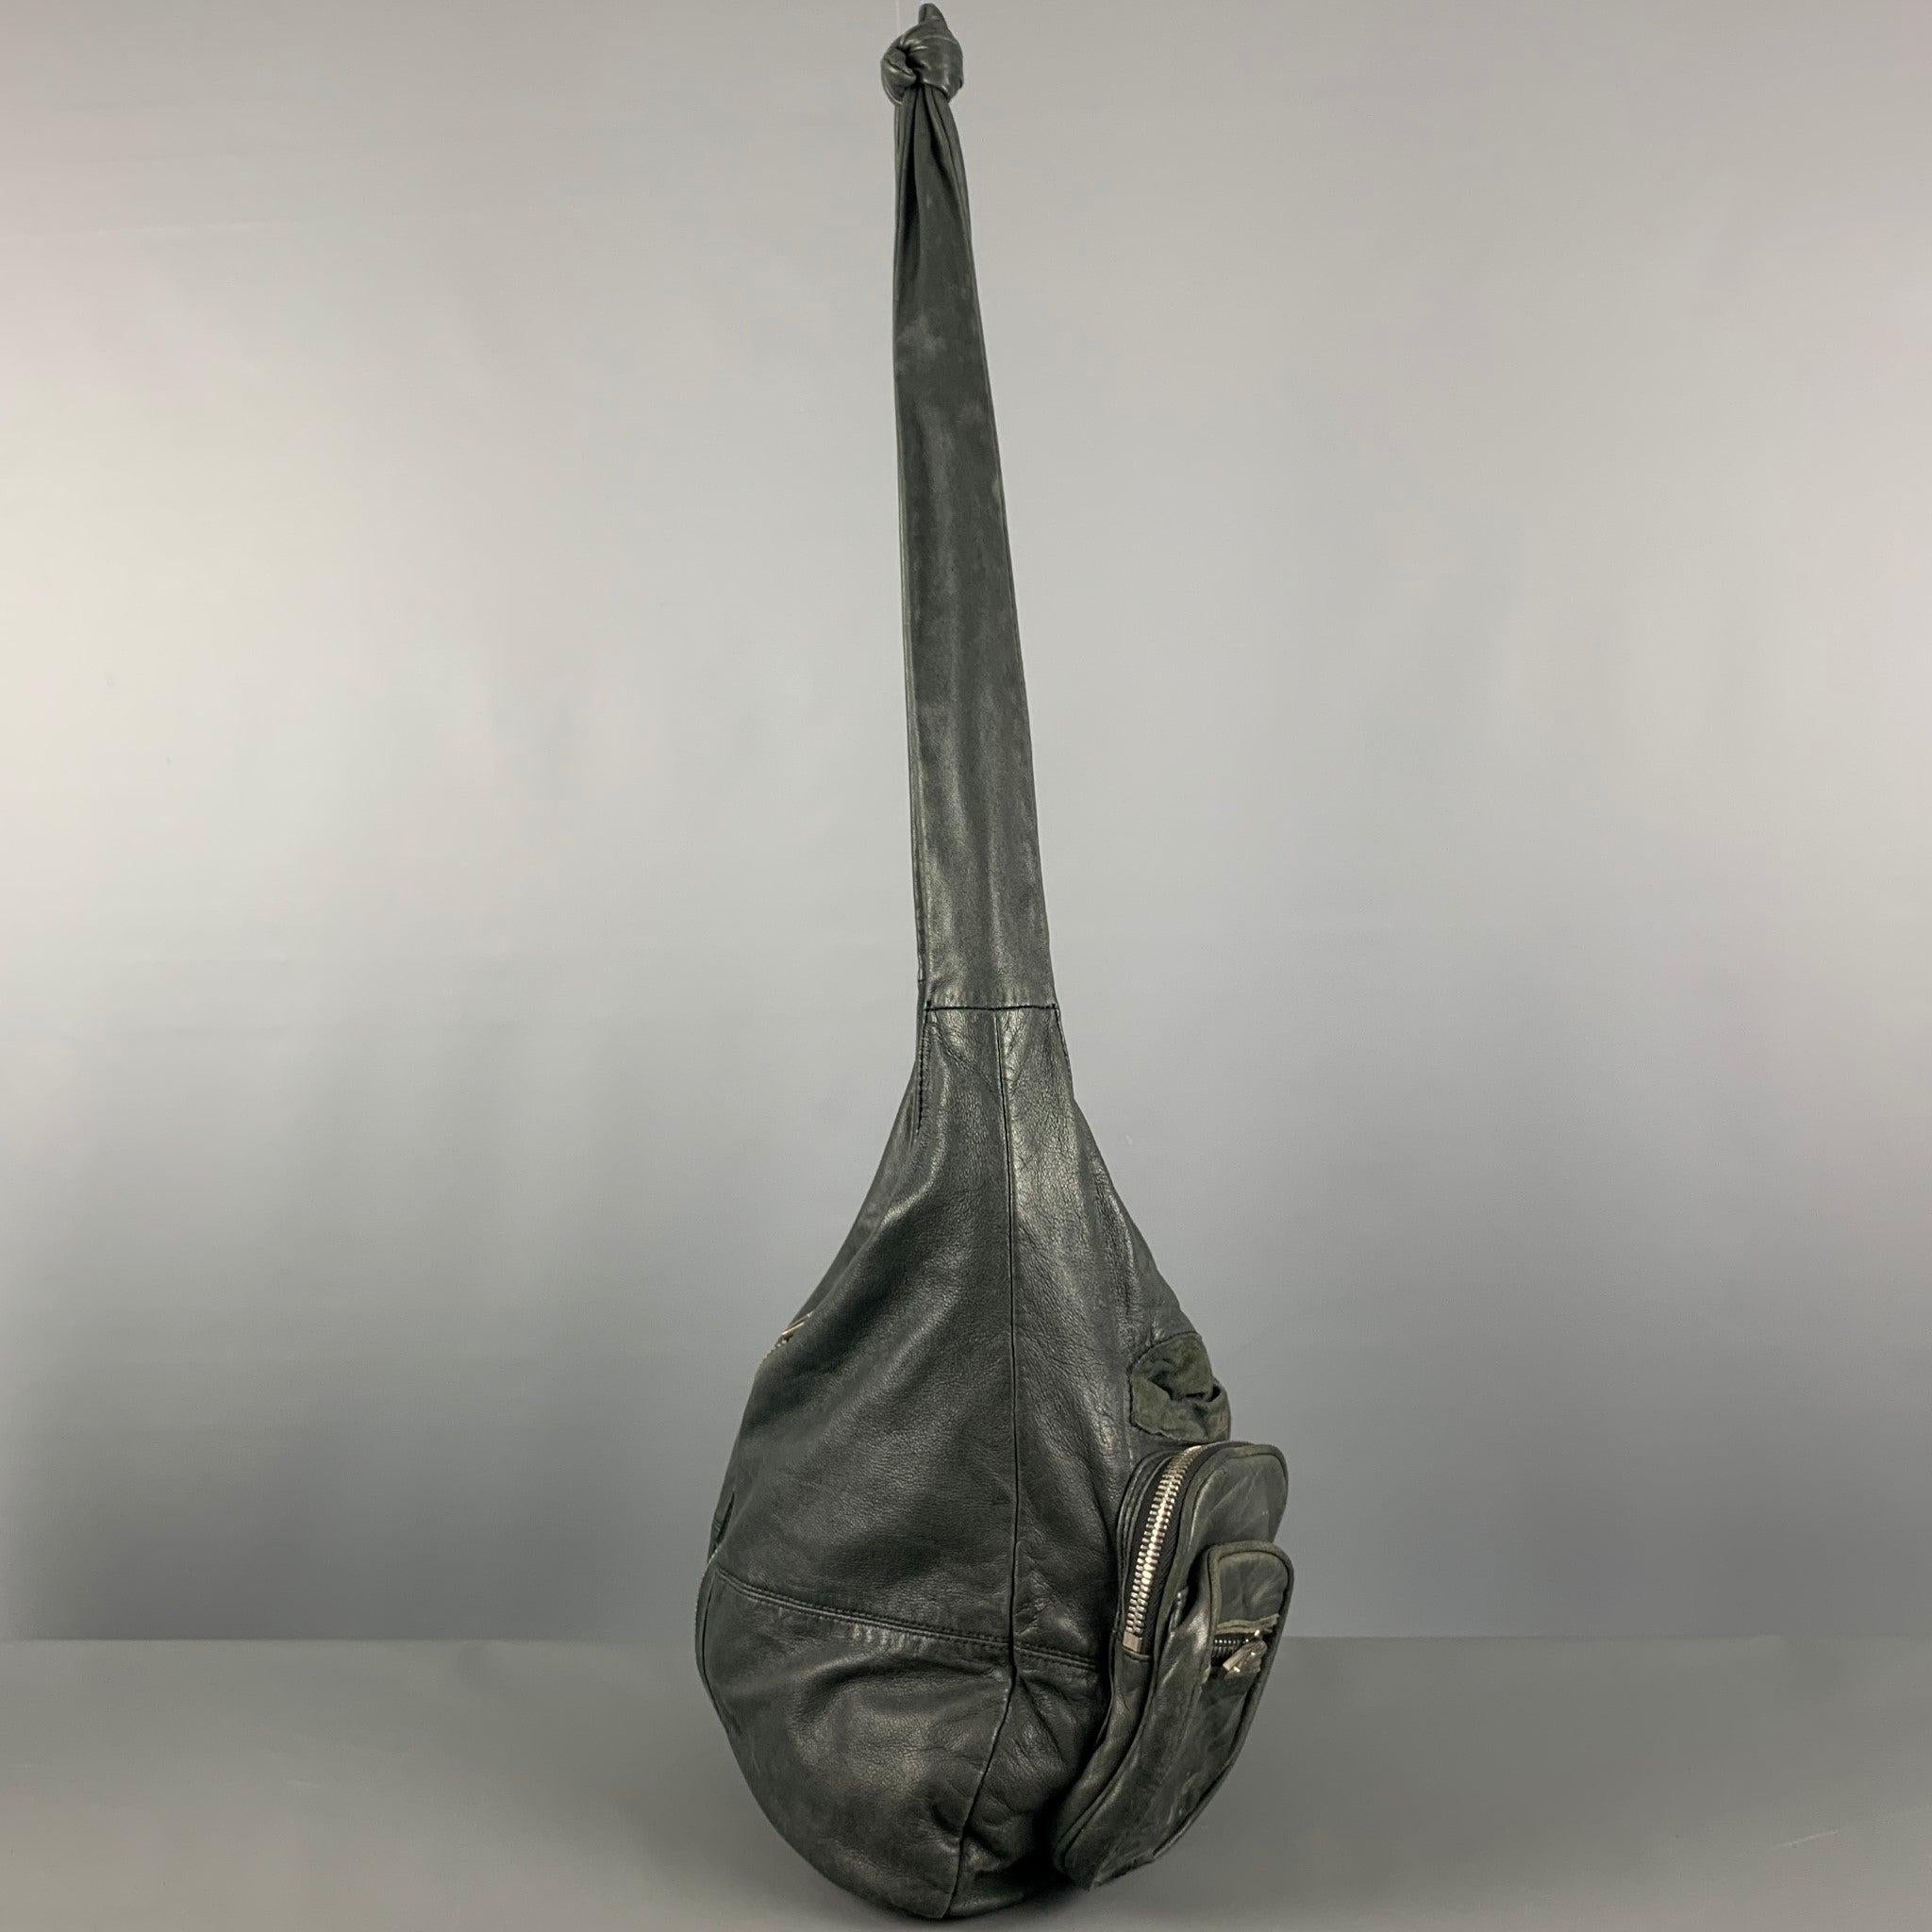 ALEXANDER WANG hobo handbag comes in a green leather featuring shoulder leather straps, silver tone hardware, donna pockets with zipper closure, inner pockets, and a zipper closure.Good Pre-Owned Condition. Moderate Signs of Wear. Moderate